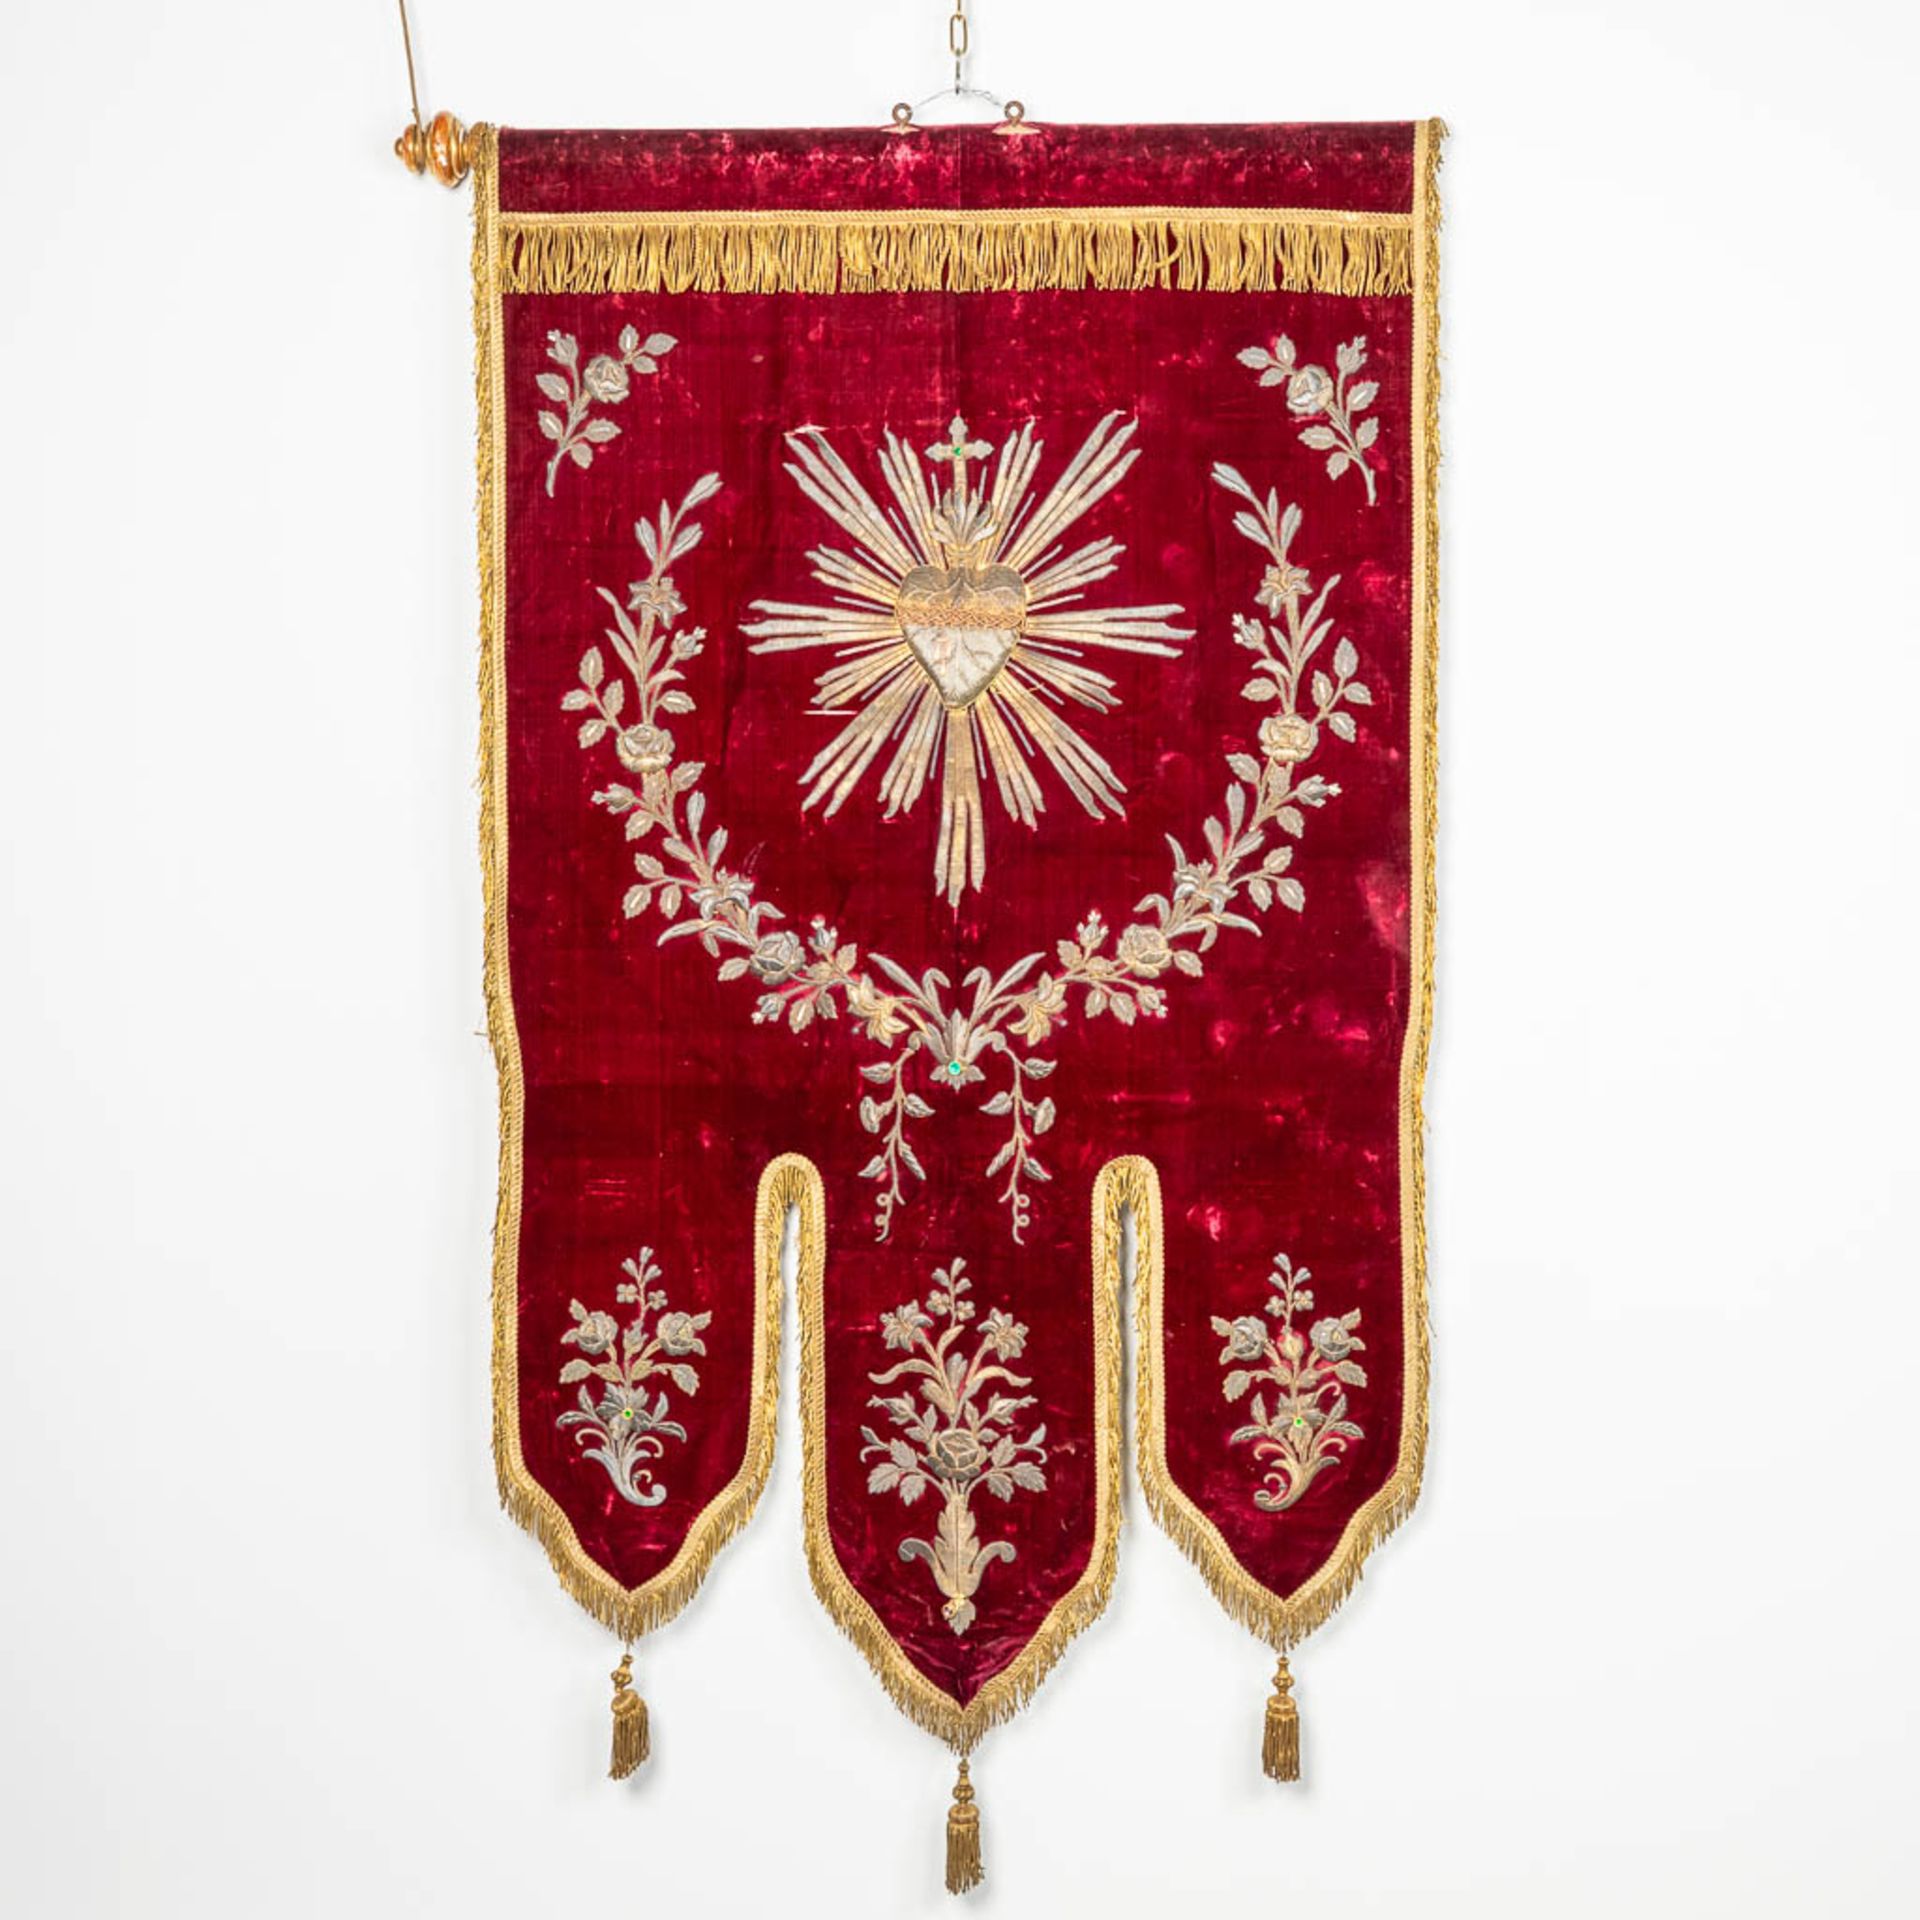 An embroidered banner with a 'Sacred Heart' image.